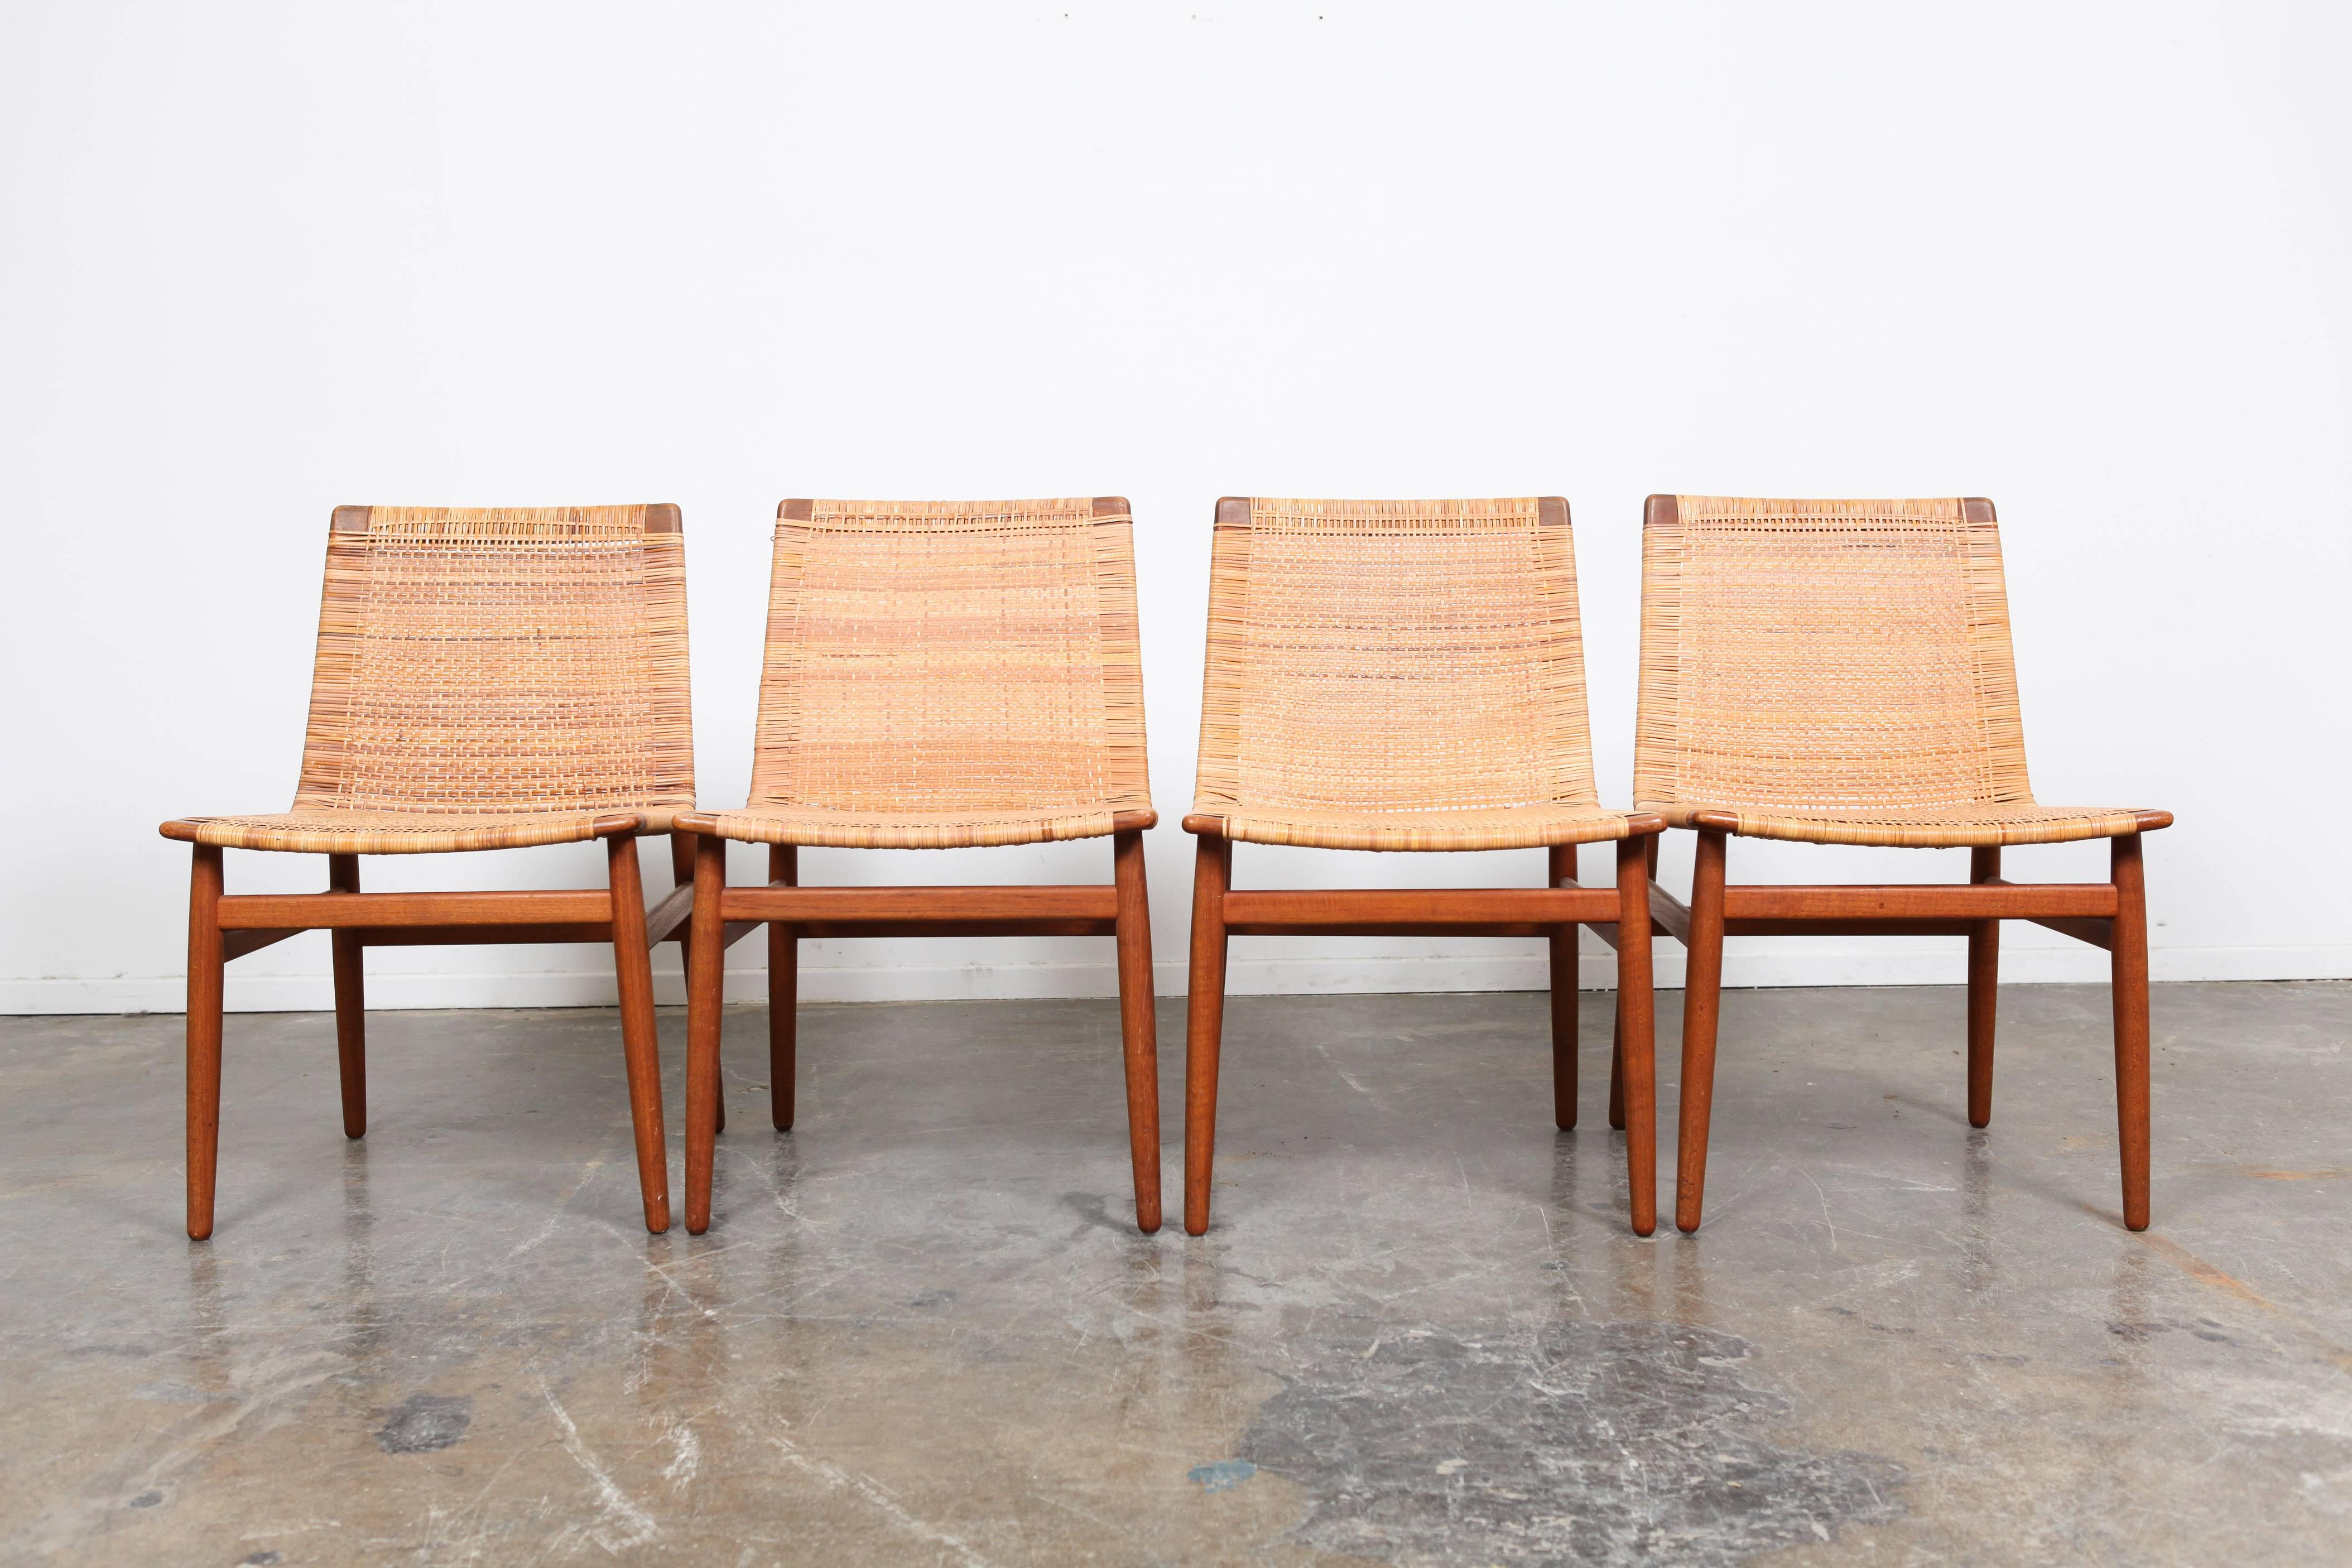 Mid-20th Century Set of Four Very Rare Teak Danish Dining Chairs by Jorgen Høj